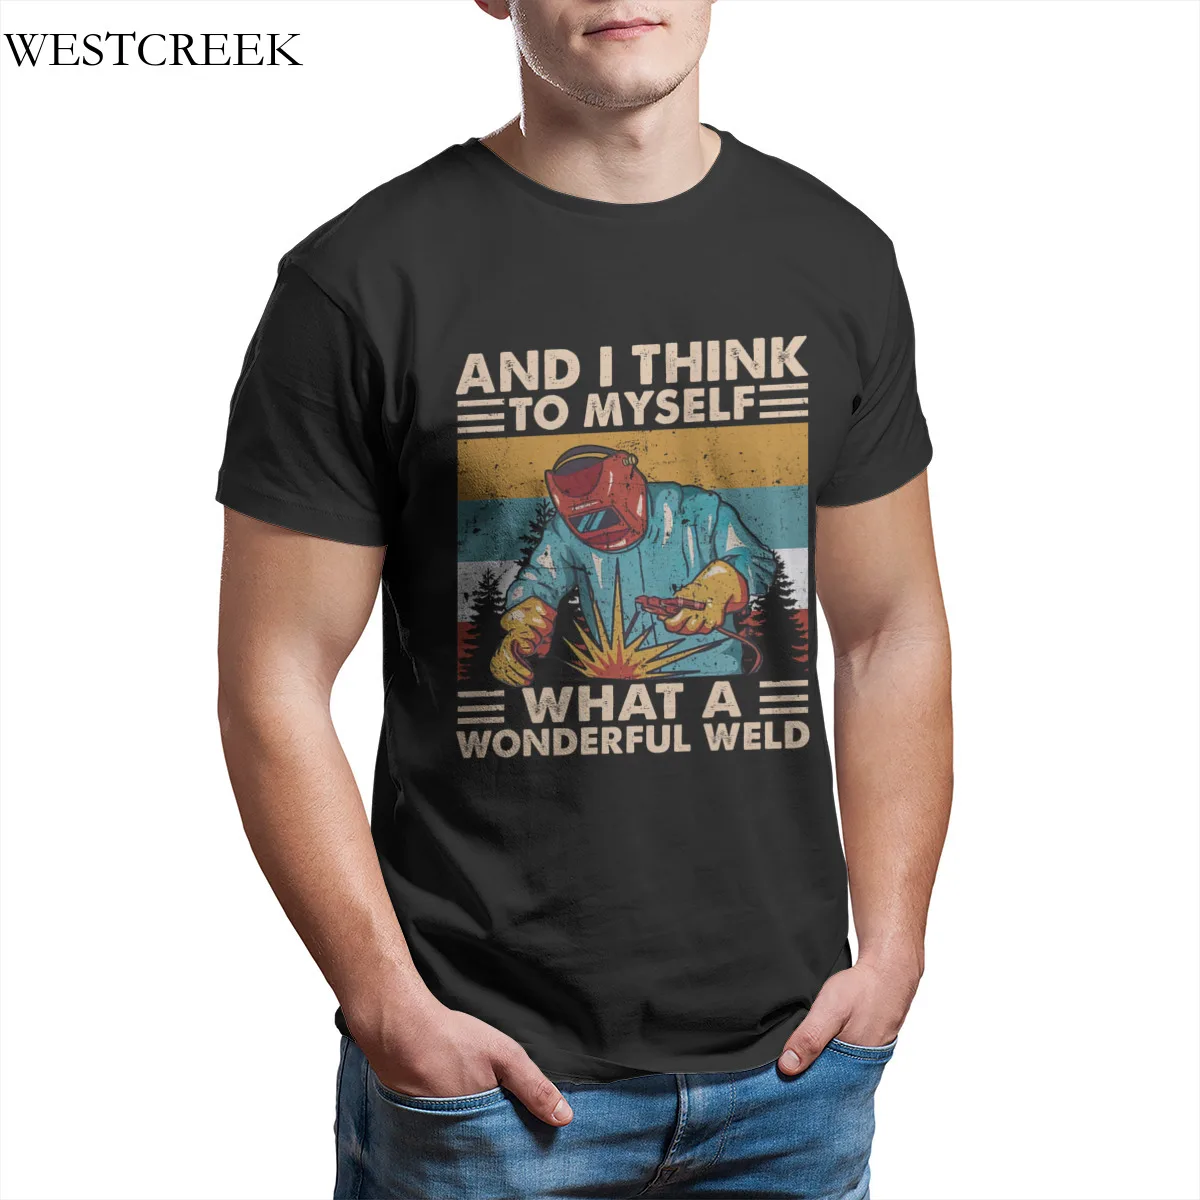 

Wholesale Men's T-Shirt And I Think To Myself What A Wonderful Weld T-Shirts Essentials Vintage Funny Tshirts 33210